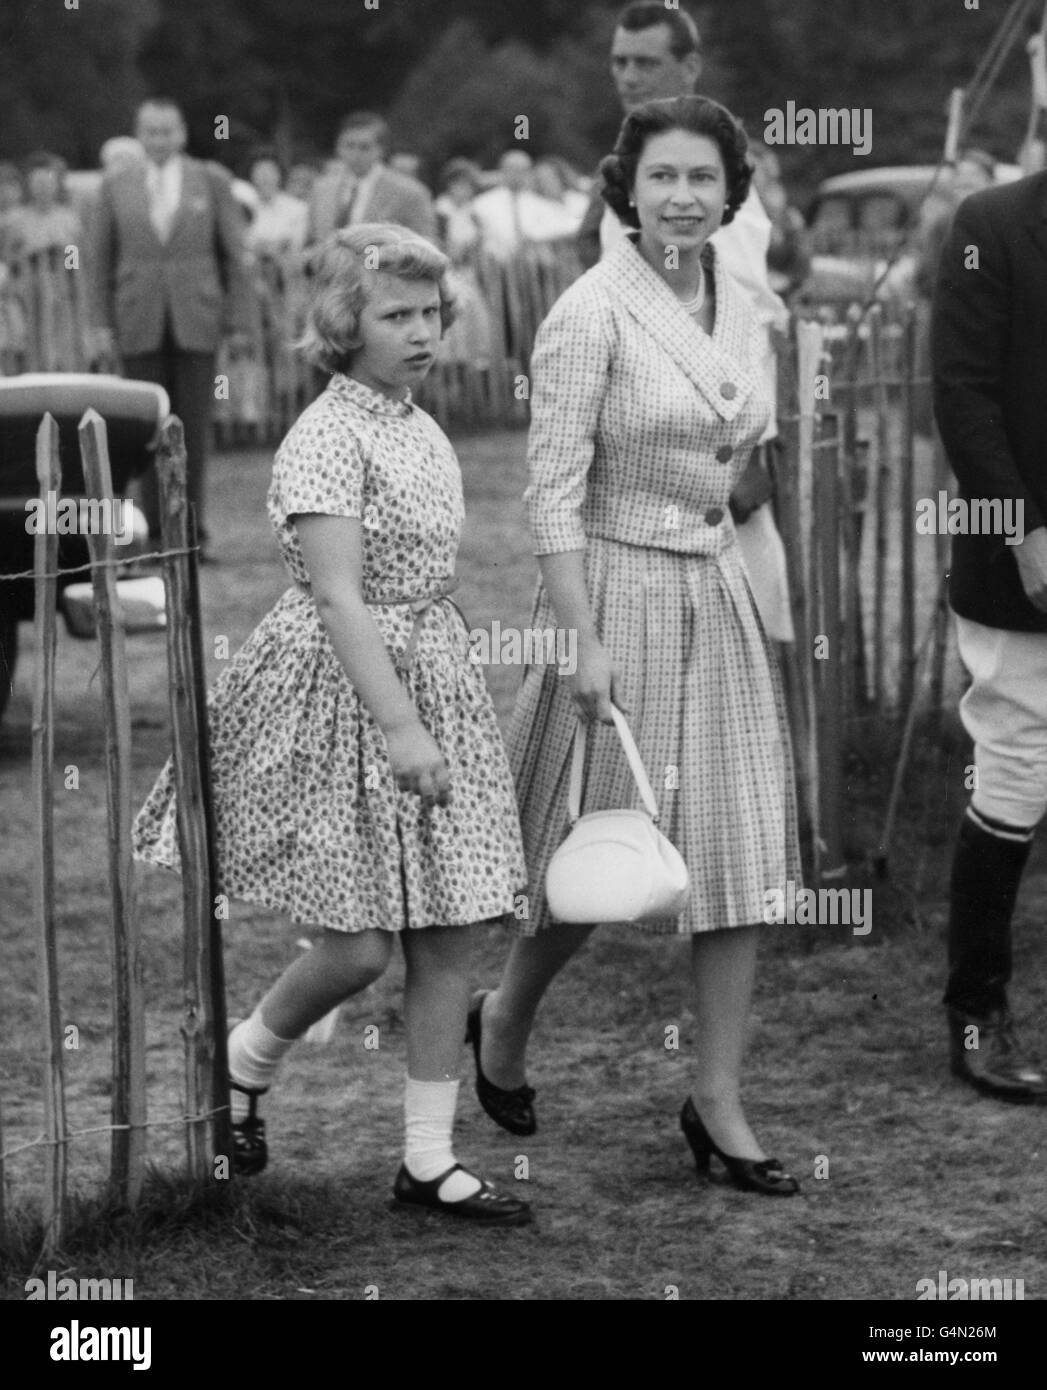 Princess Anne walks with Queen Elizabeth II at Smith's Lawn, Windsor Great Park, where they saw the Duke of Edinburgh play in a polo match. Stock Photo